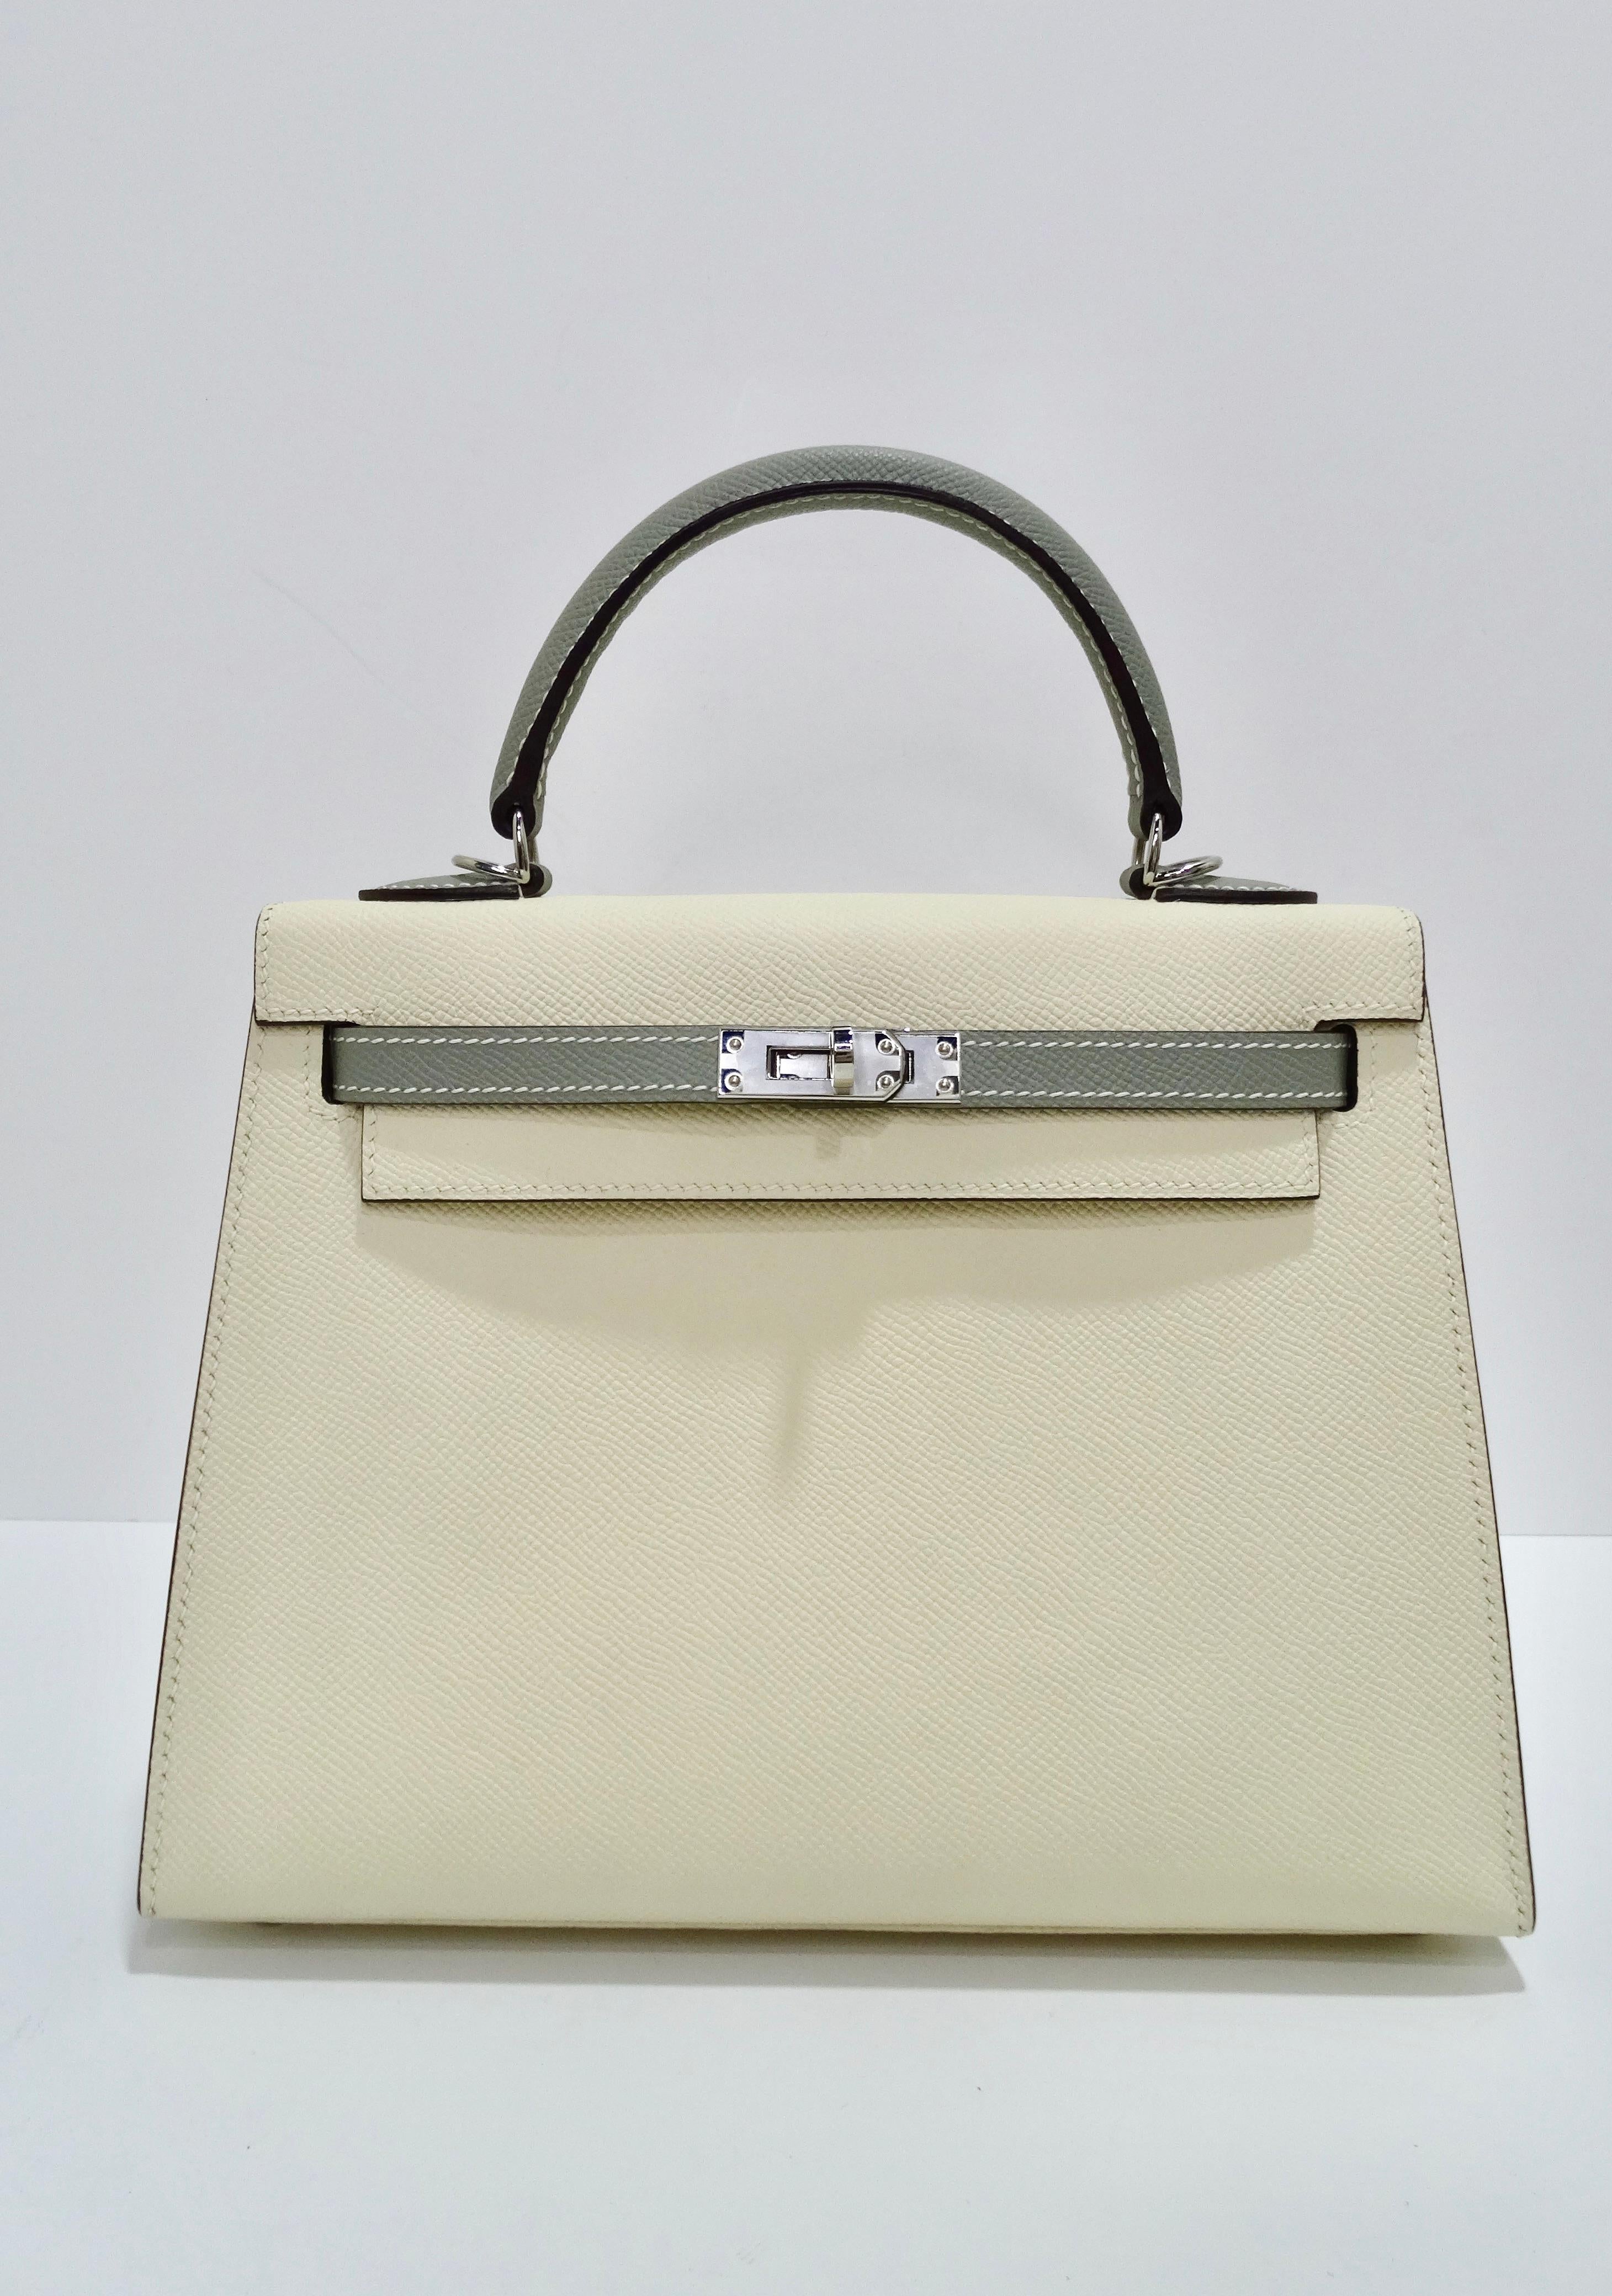 This Hermès Epsom Mini Horseshoe Kelly Sellier 25cm Craie Gris Asphalte is nothing short of beautiful. This stunning Hermes classic handbag is beautifully crafted in stamped epsom calfskin leather in off white and gray. A single rolled leather top